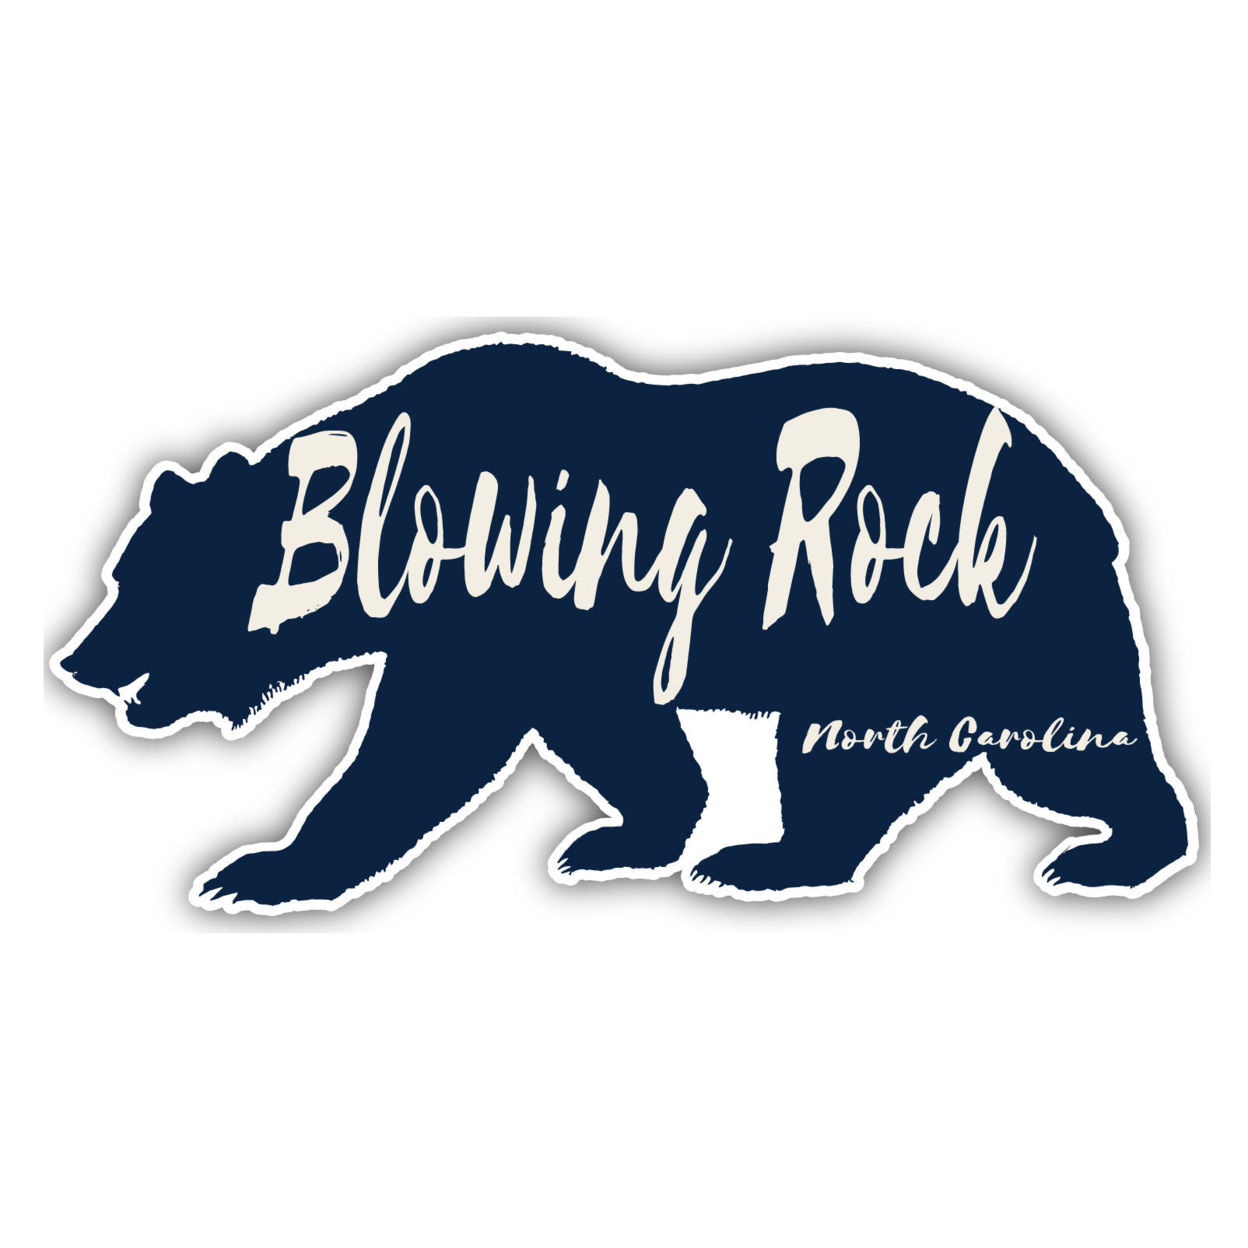 Blowing Rock North Carolina Souvenir Decorative Stickers (Choose Theme And Size) - 4-Pack, 4-Inch, Bear